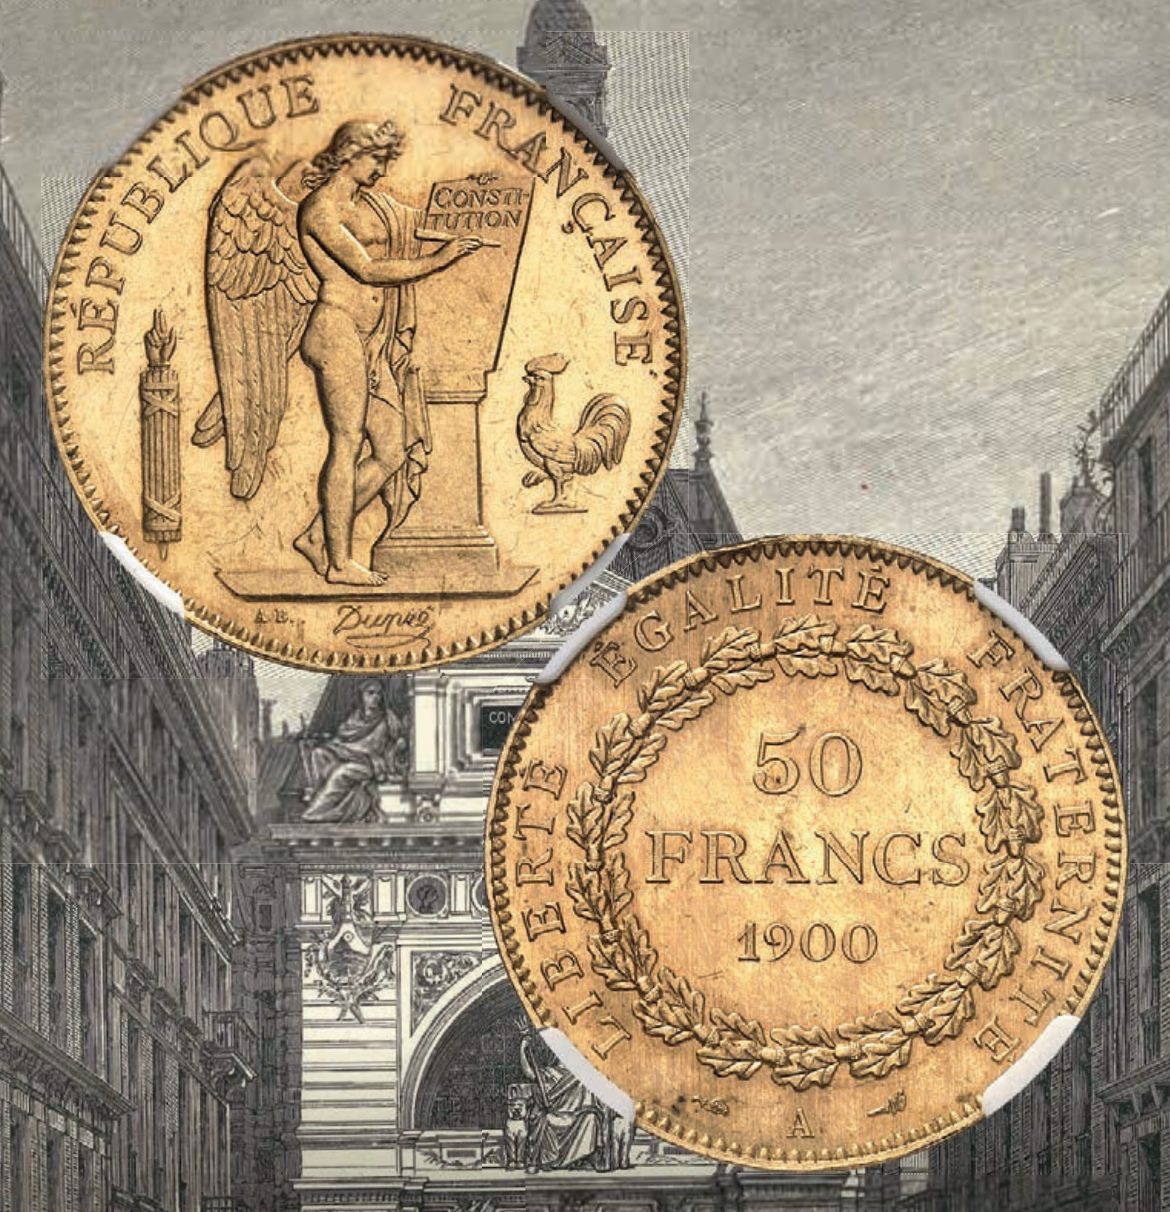 Rare Coin sold for €100,000 at Monaco Auction